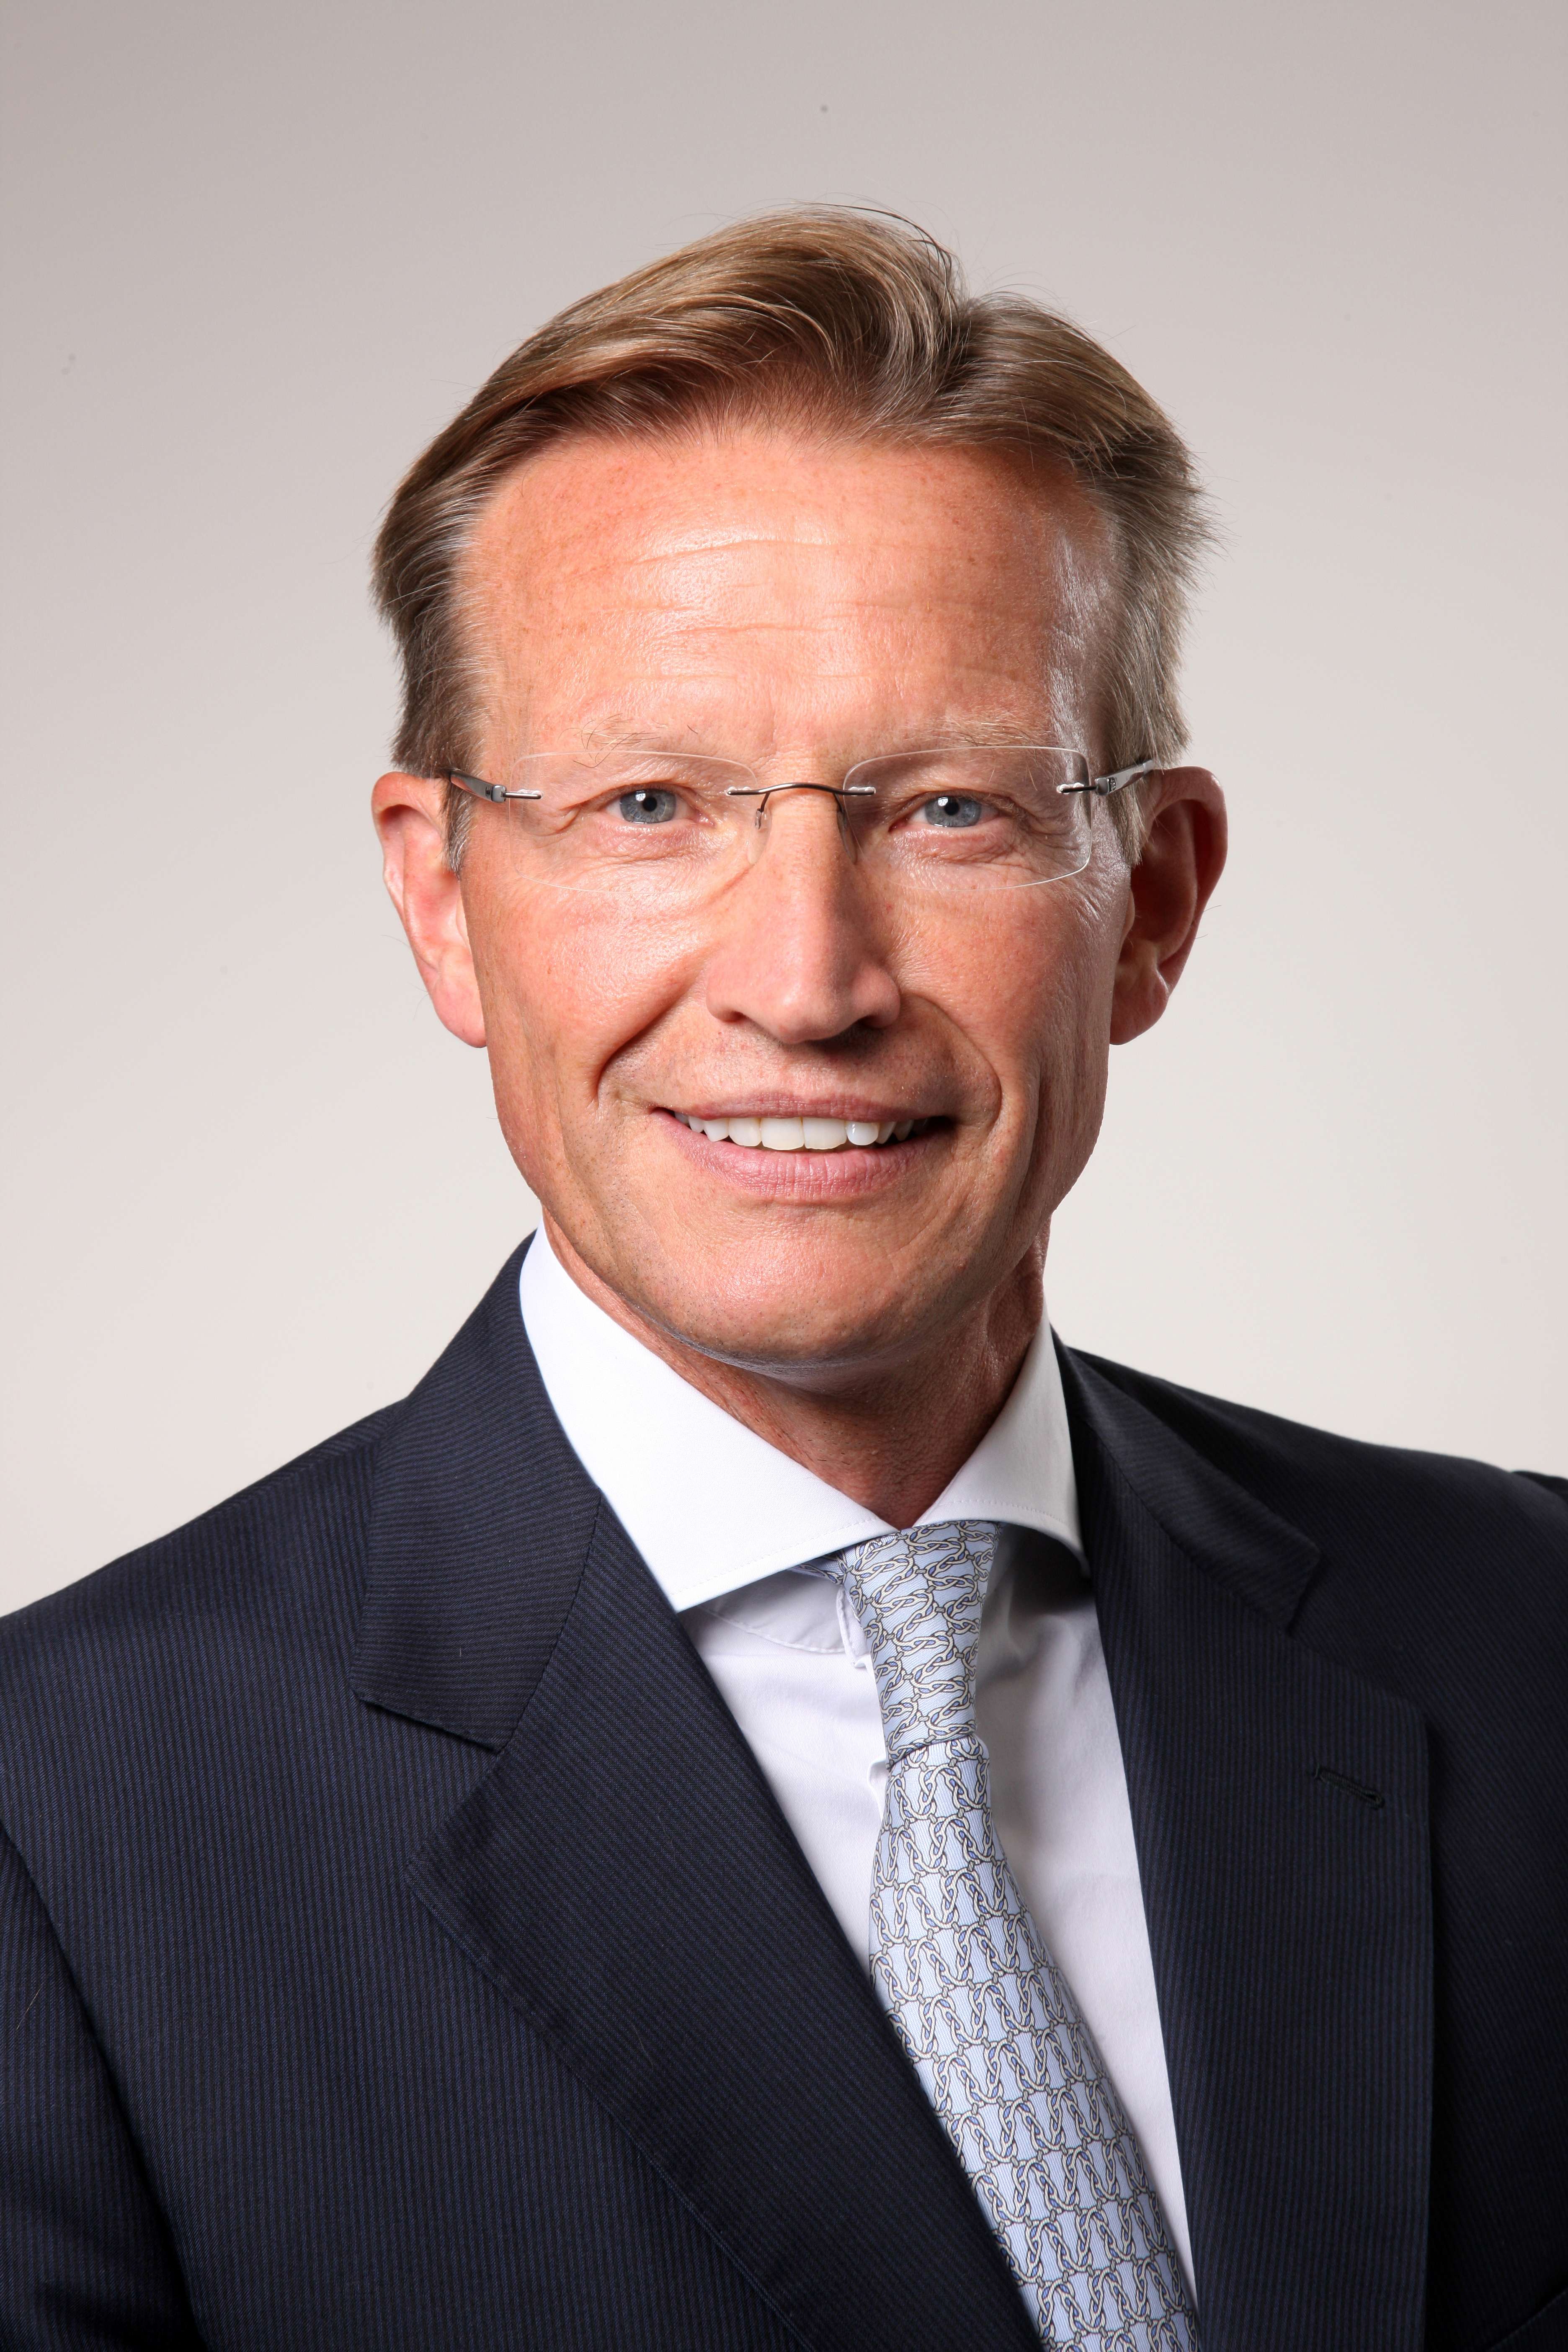 Christoph Mauchle, group’s head of client business and member of the group executive management